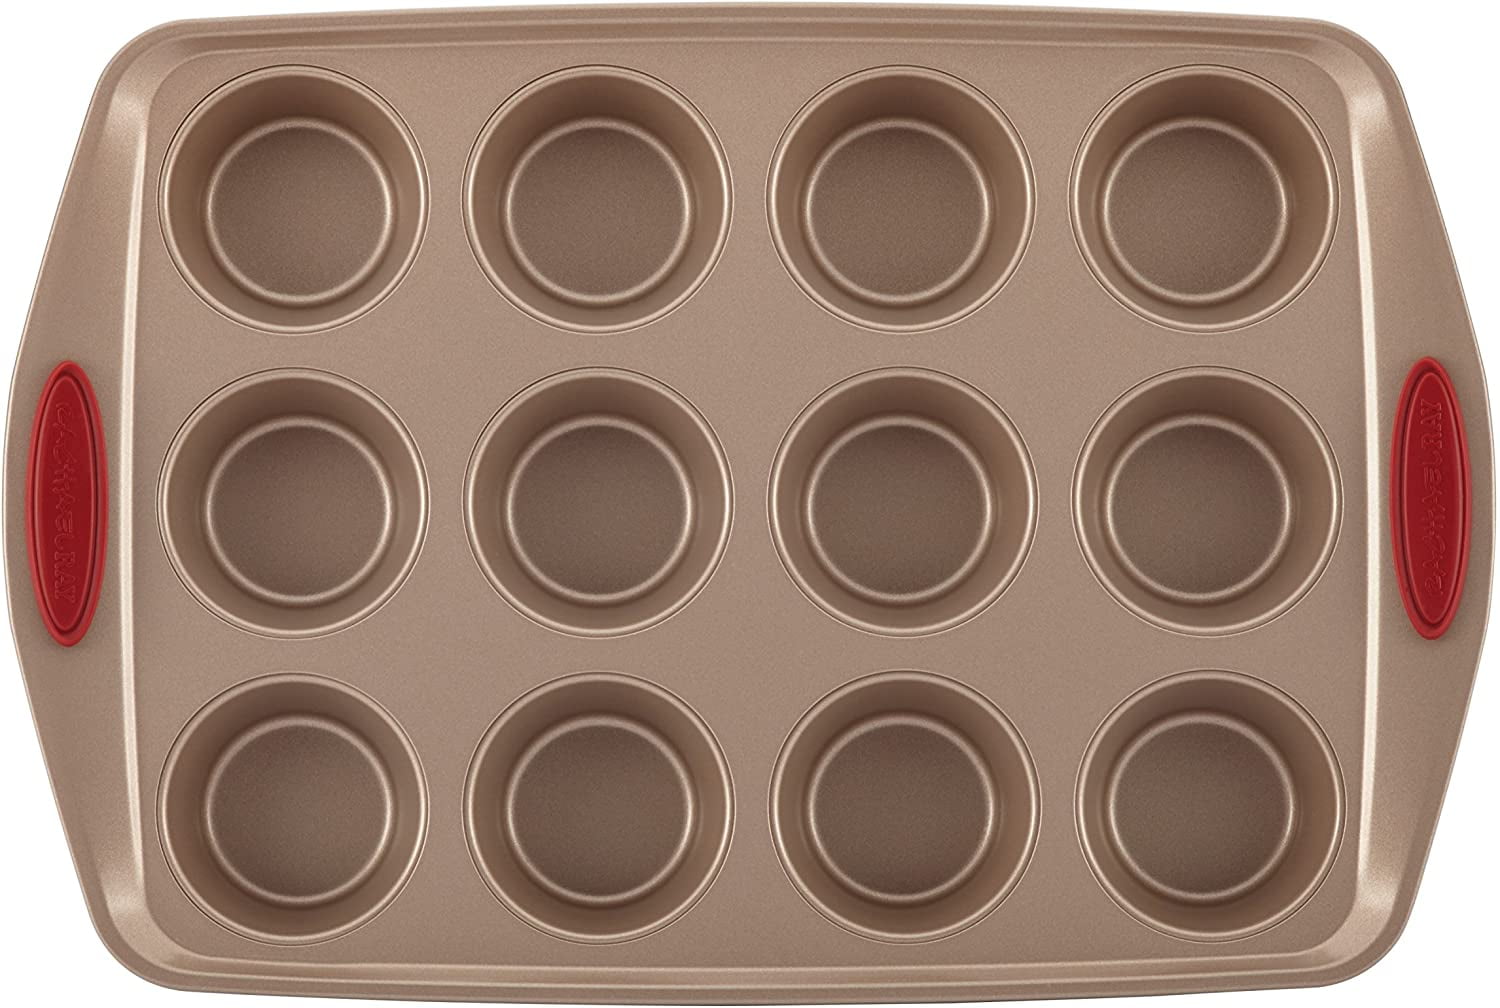 Rachael Ray Cucina Nonstick Bakeware Baking Pans Set, 10 Piece, Latte Brown  and Cranberry Red & Reviews